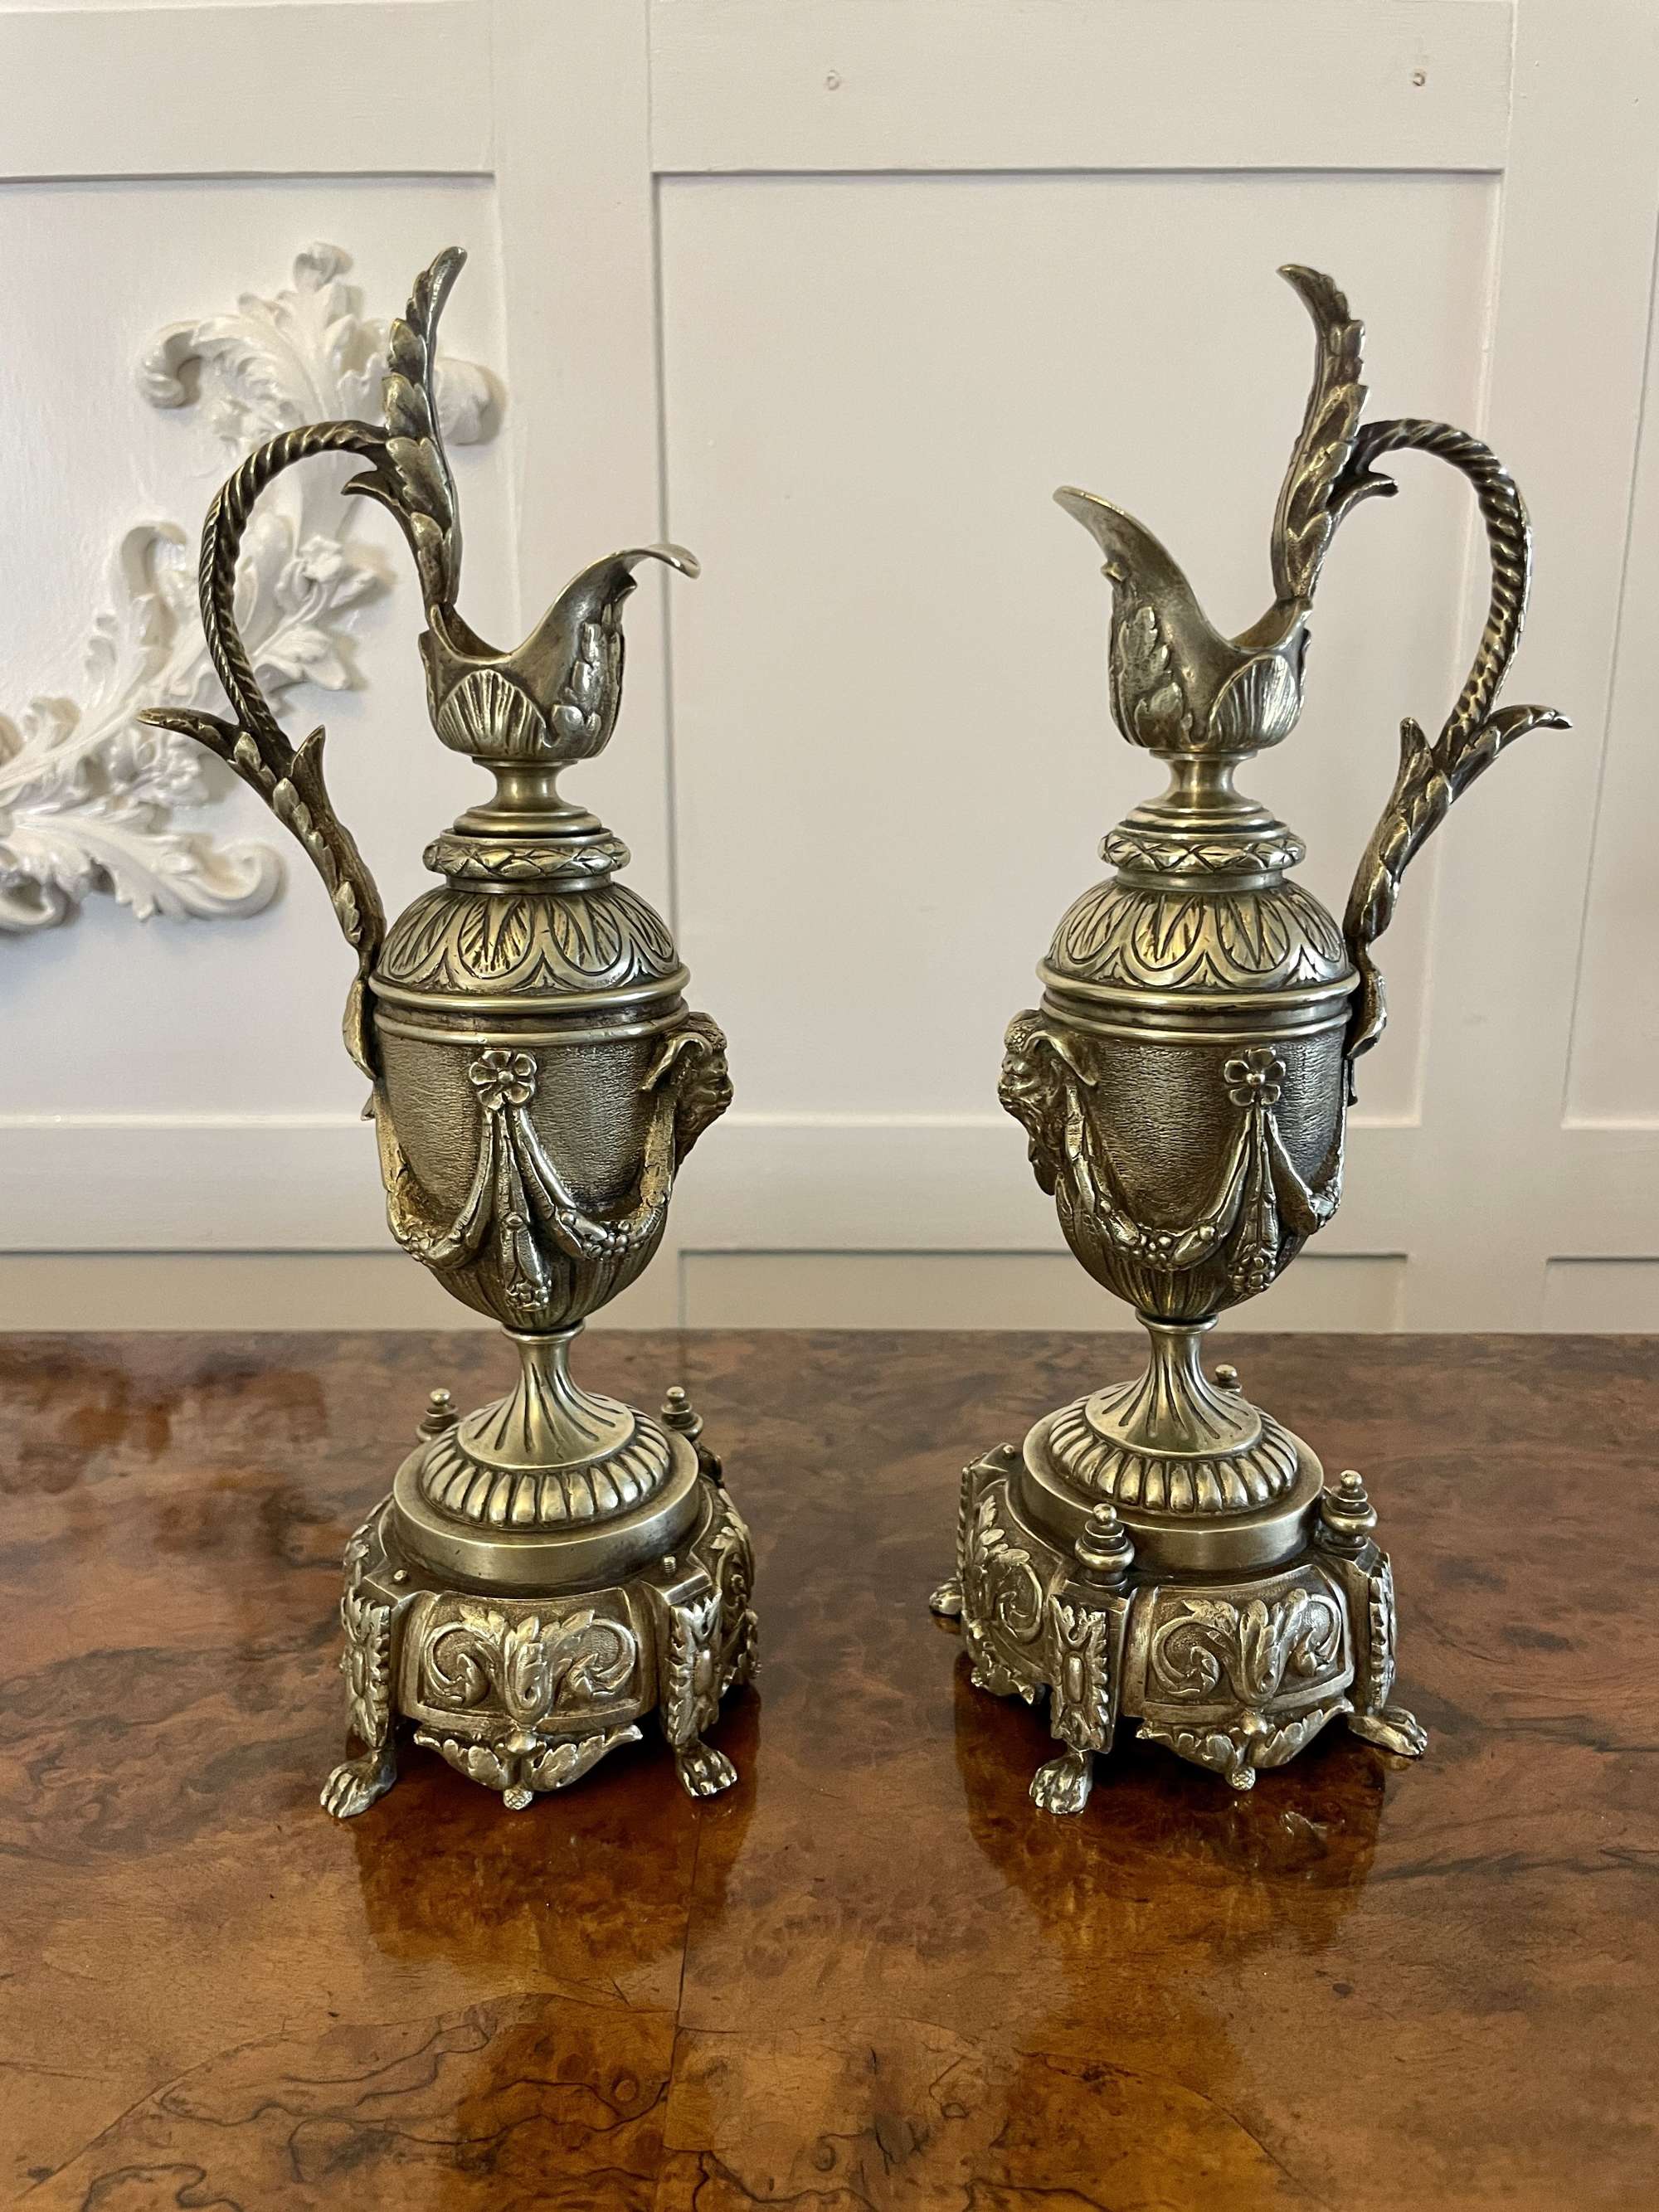 Pair of Antique Victorian Quality Ornate Brass Ewers